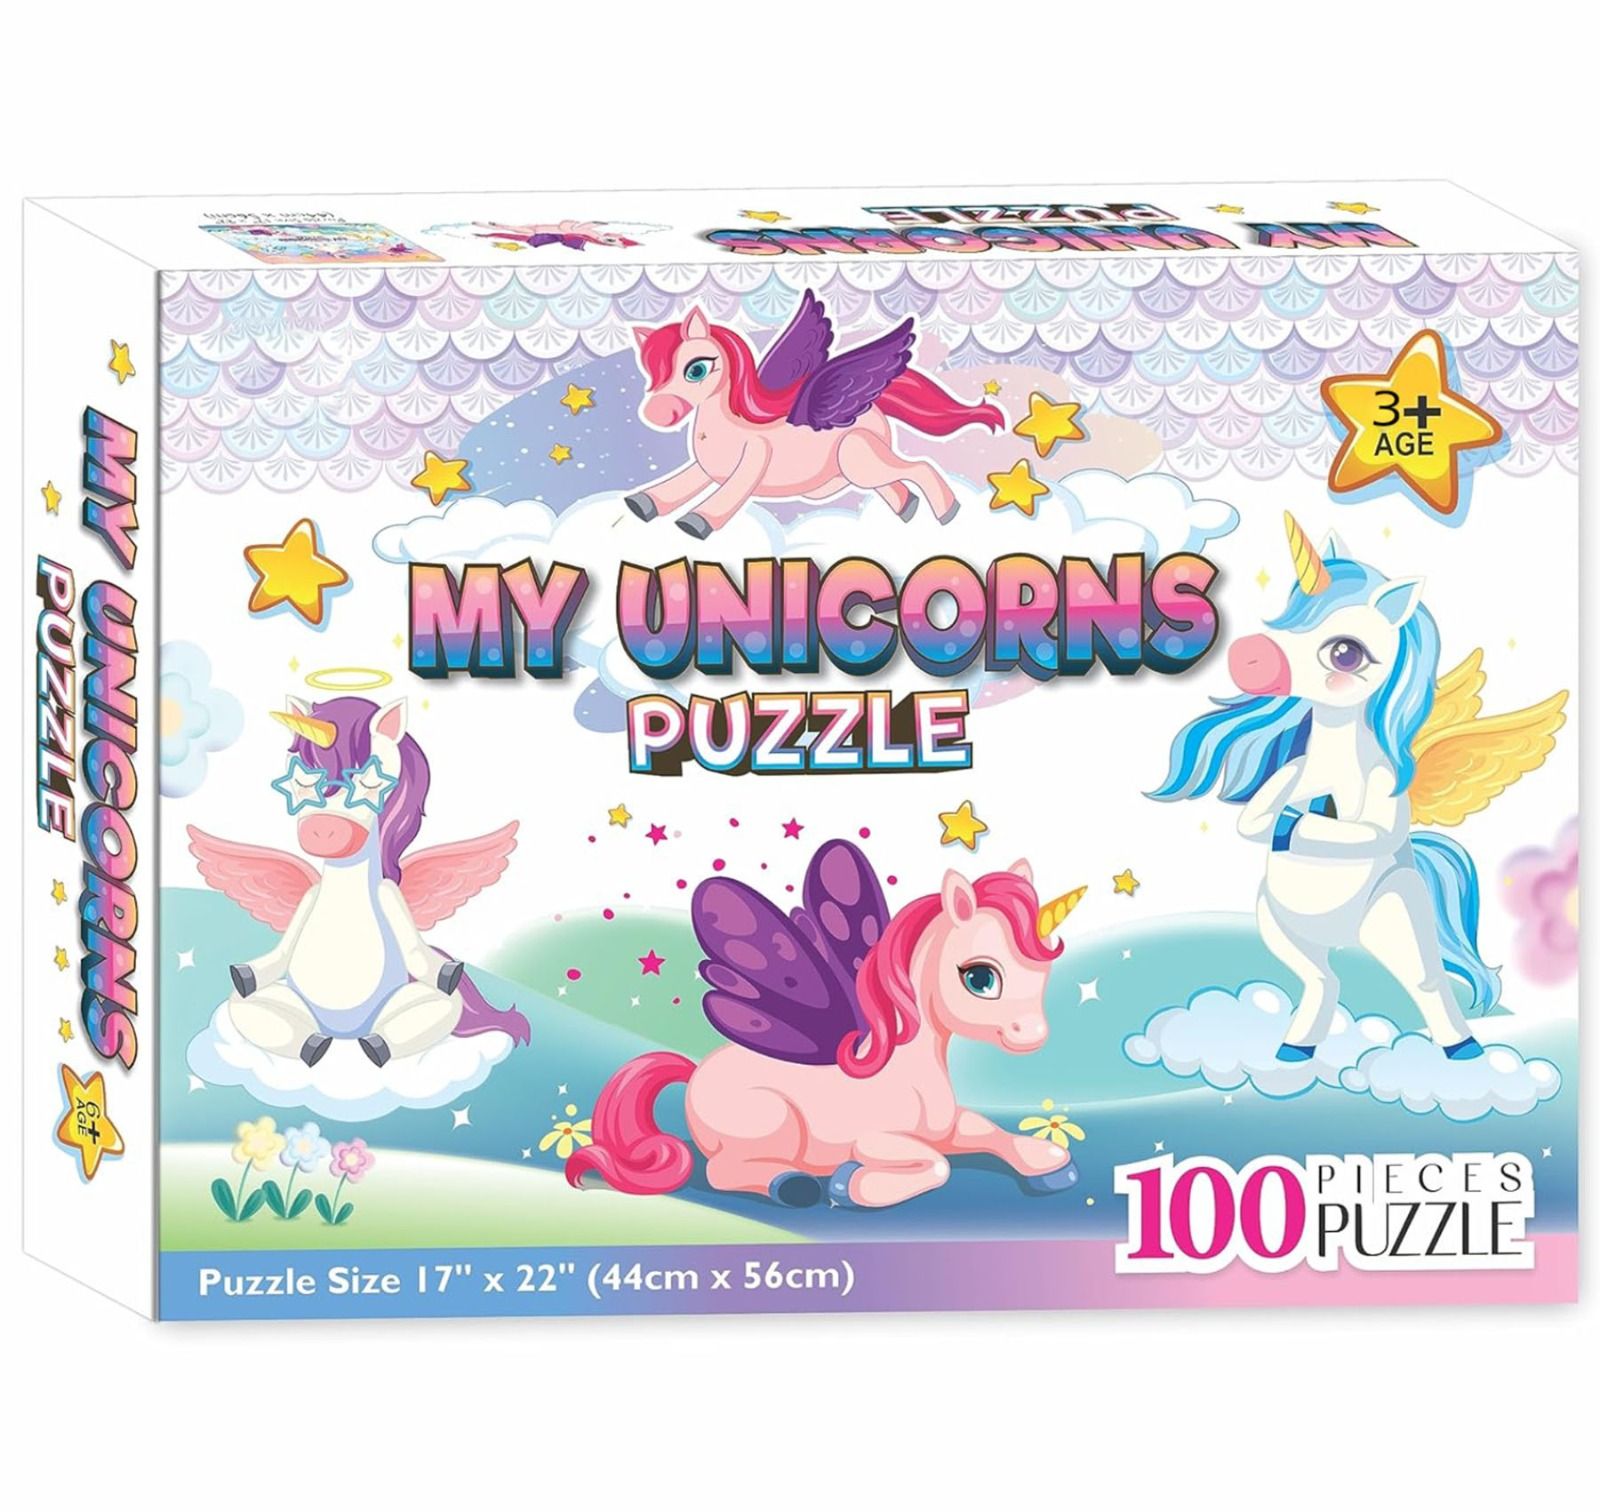 Seema Kitchenware Toys & Games Teenager My Unicorn Jigsaw Puzzles|Educational Toys for Focus and Memory Promoting Learning & Creativity|100 Pieces Puzzles (Set of 1 Puzzles in Box) for Age 3 Years and Above